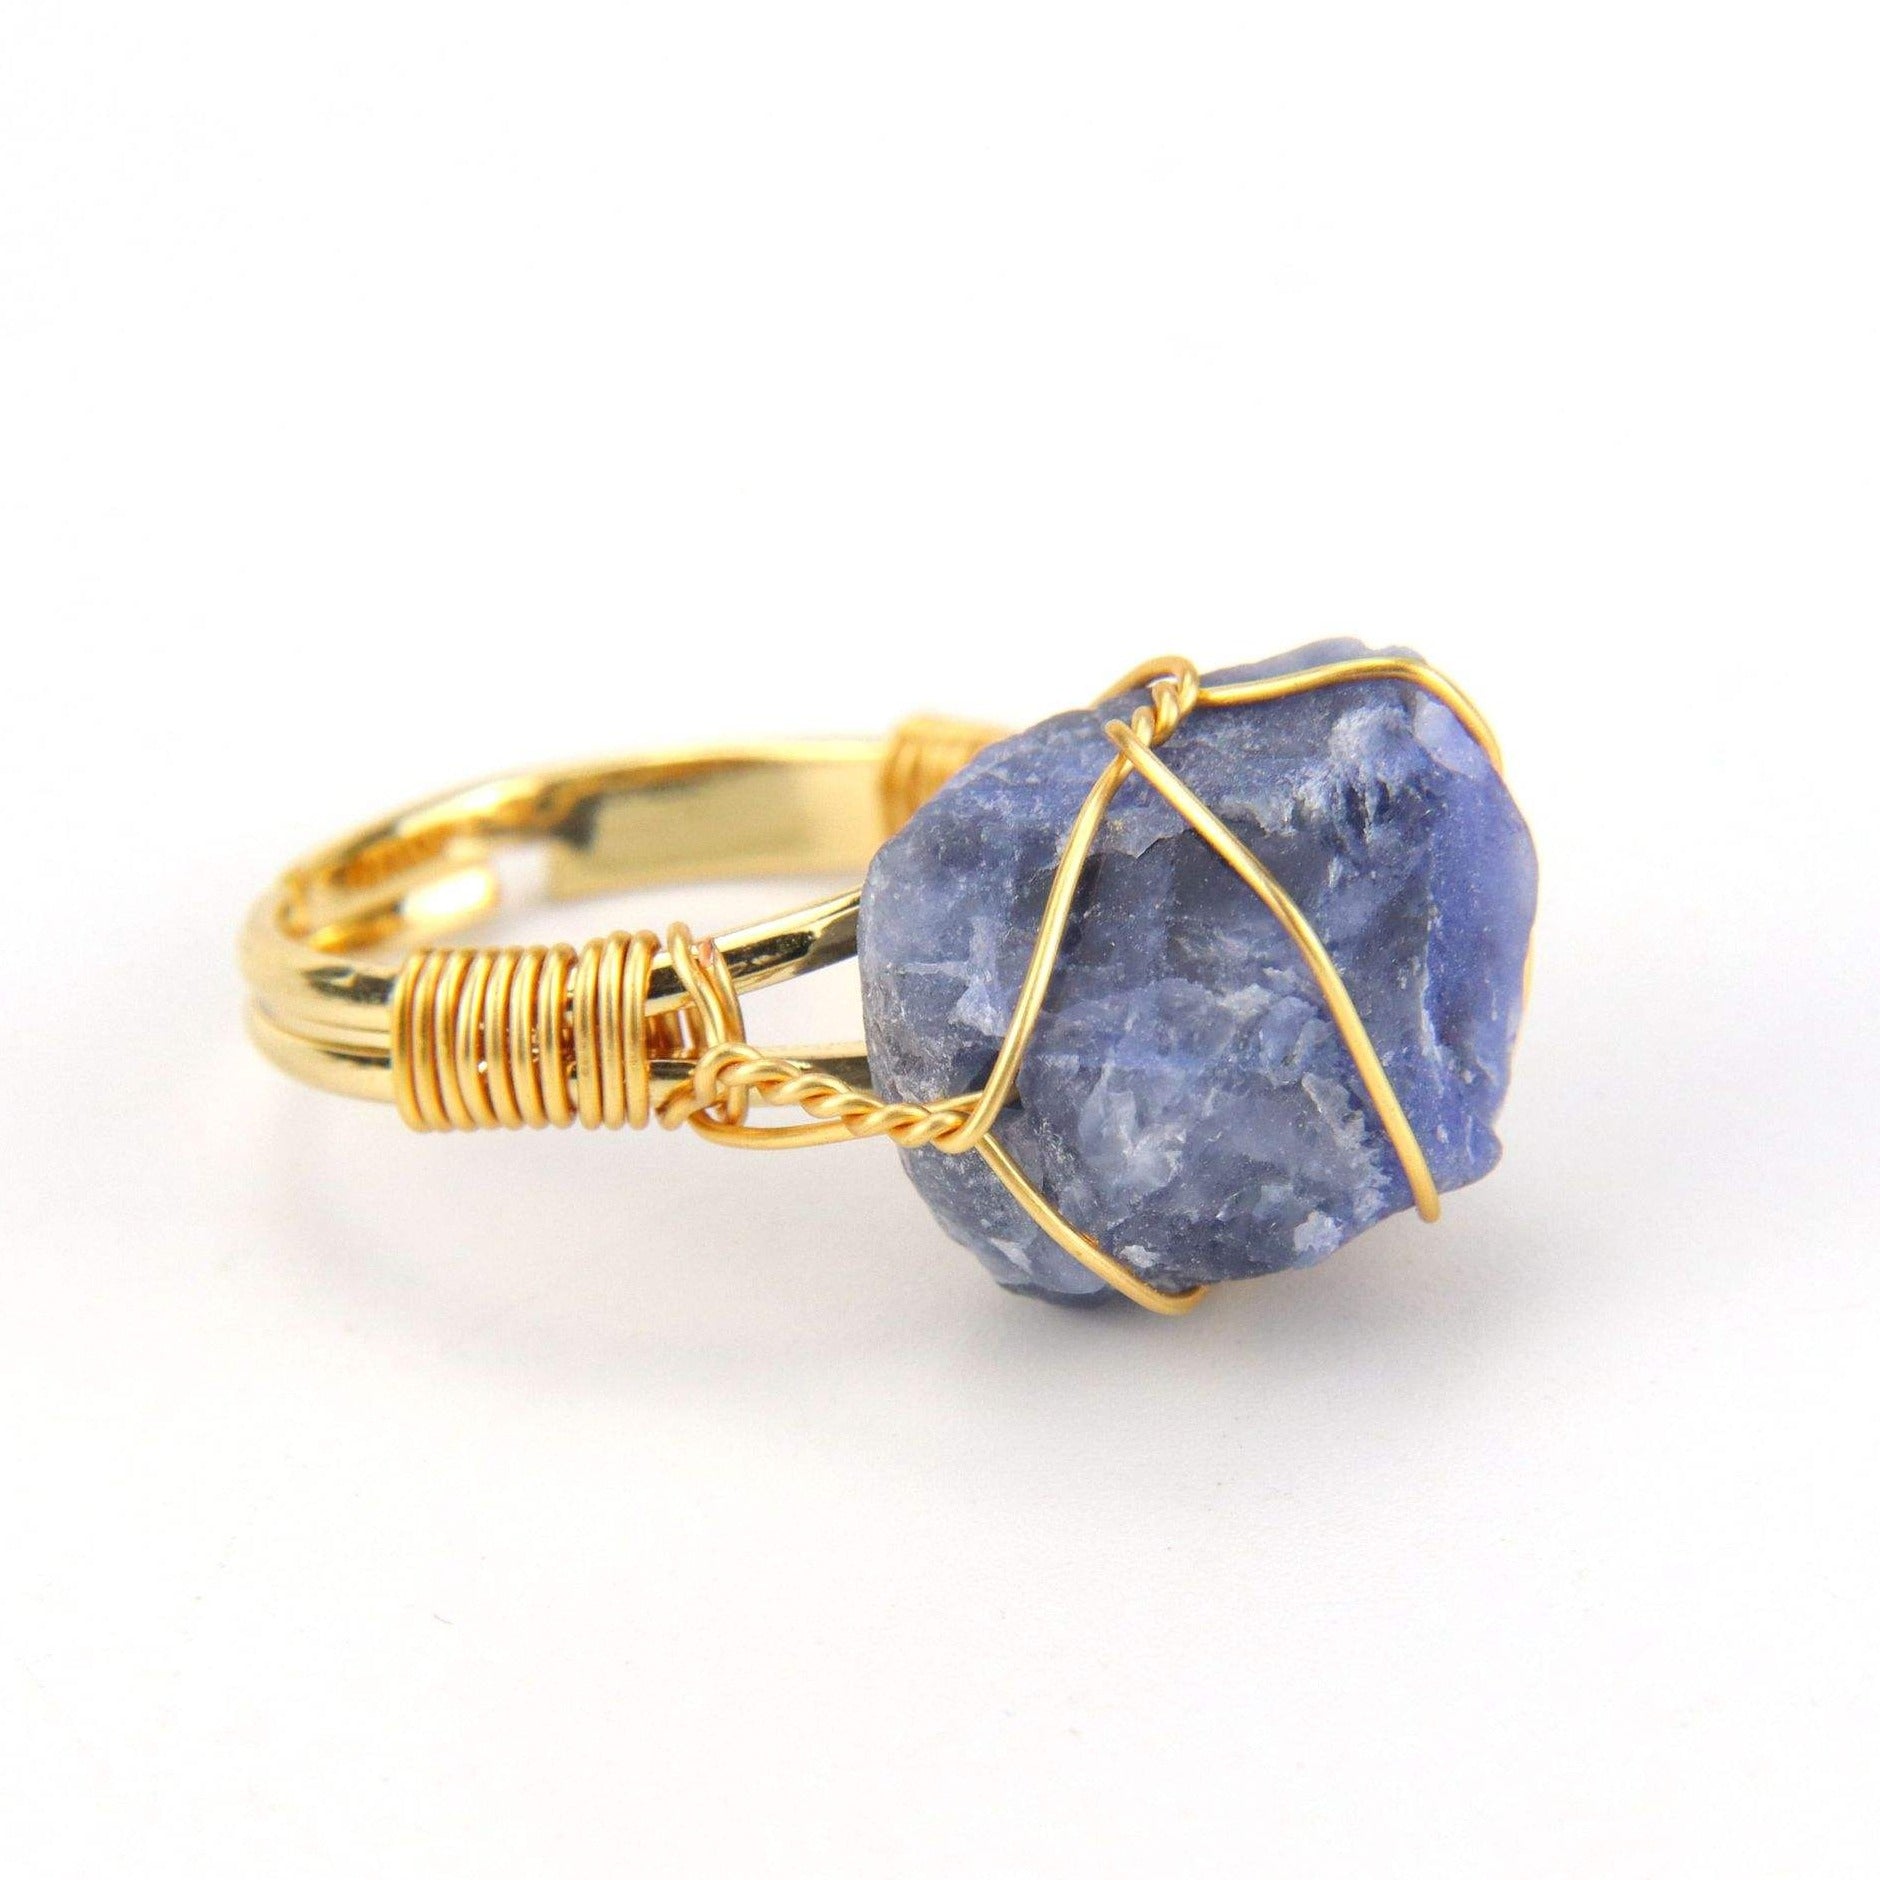 Lapis Lazuli Wire Wrapped Ring for wisdom, self-awareness